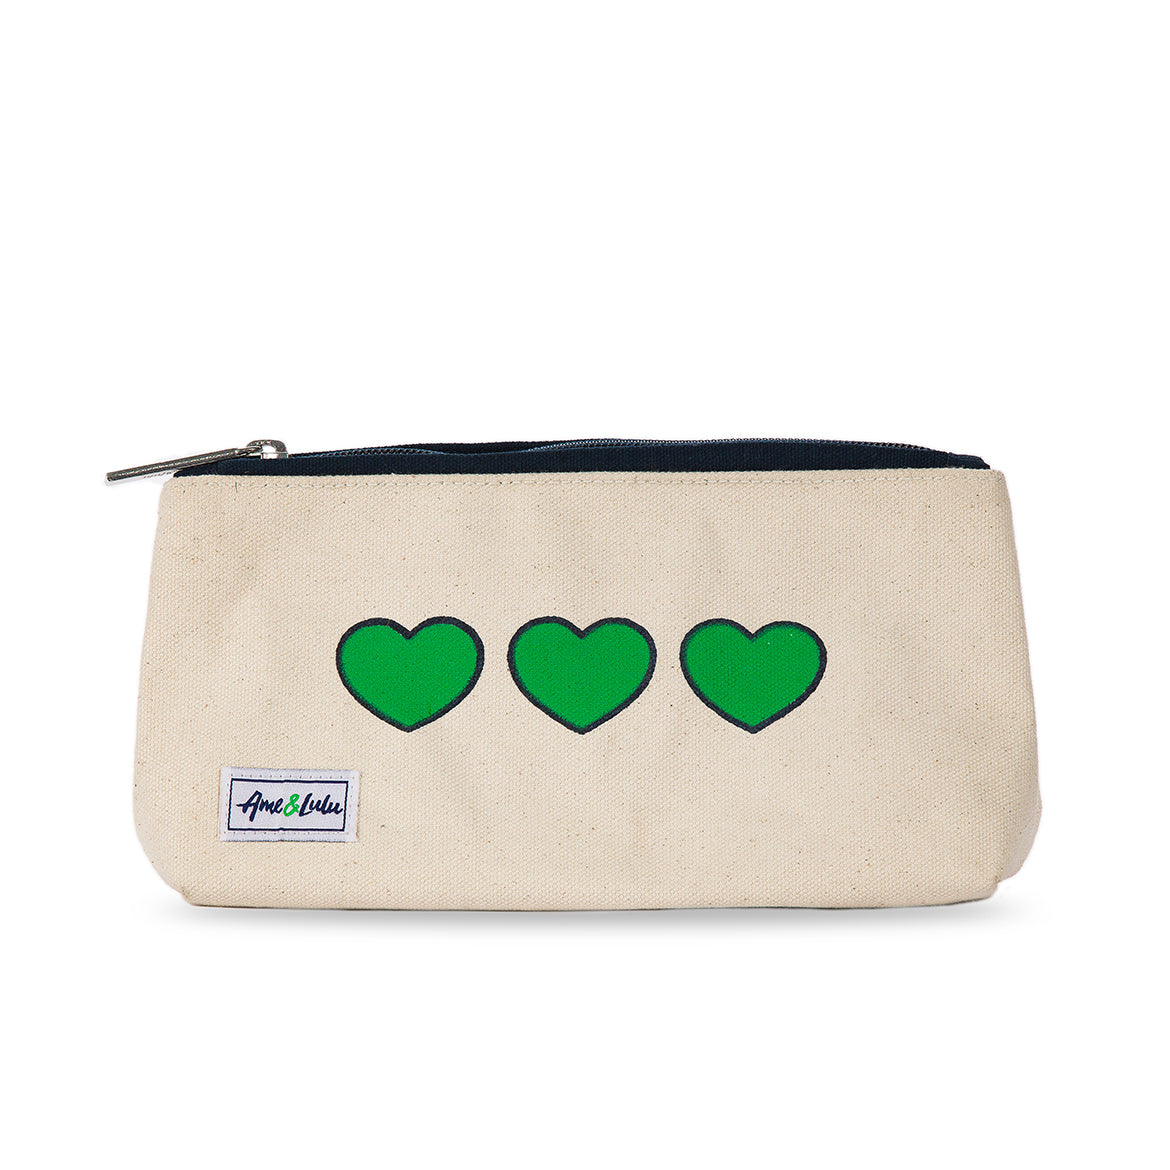 Front view of small canvas makeup pouch with navy zipper. Front has three green hearts printed across front.